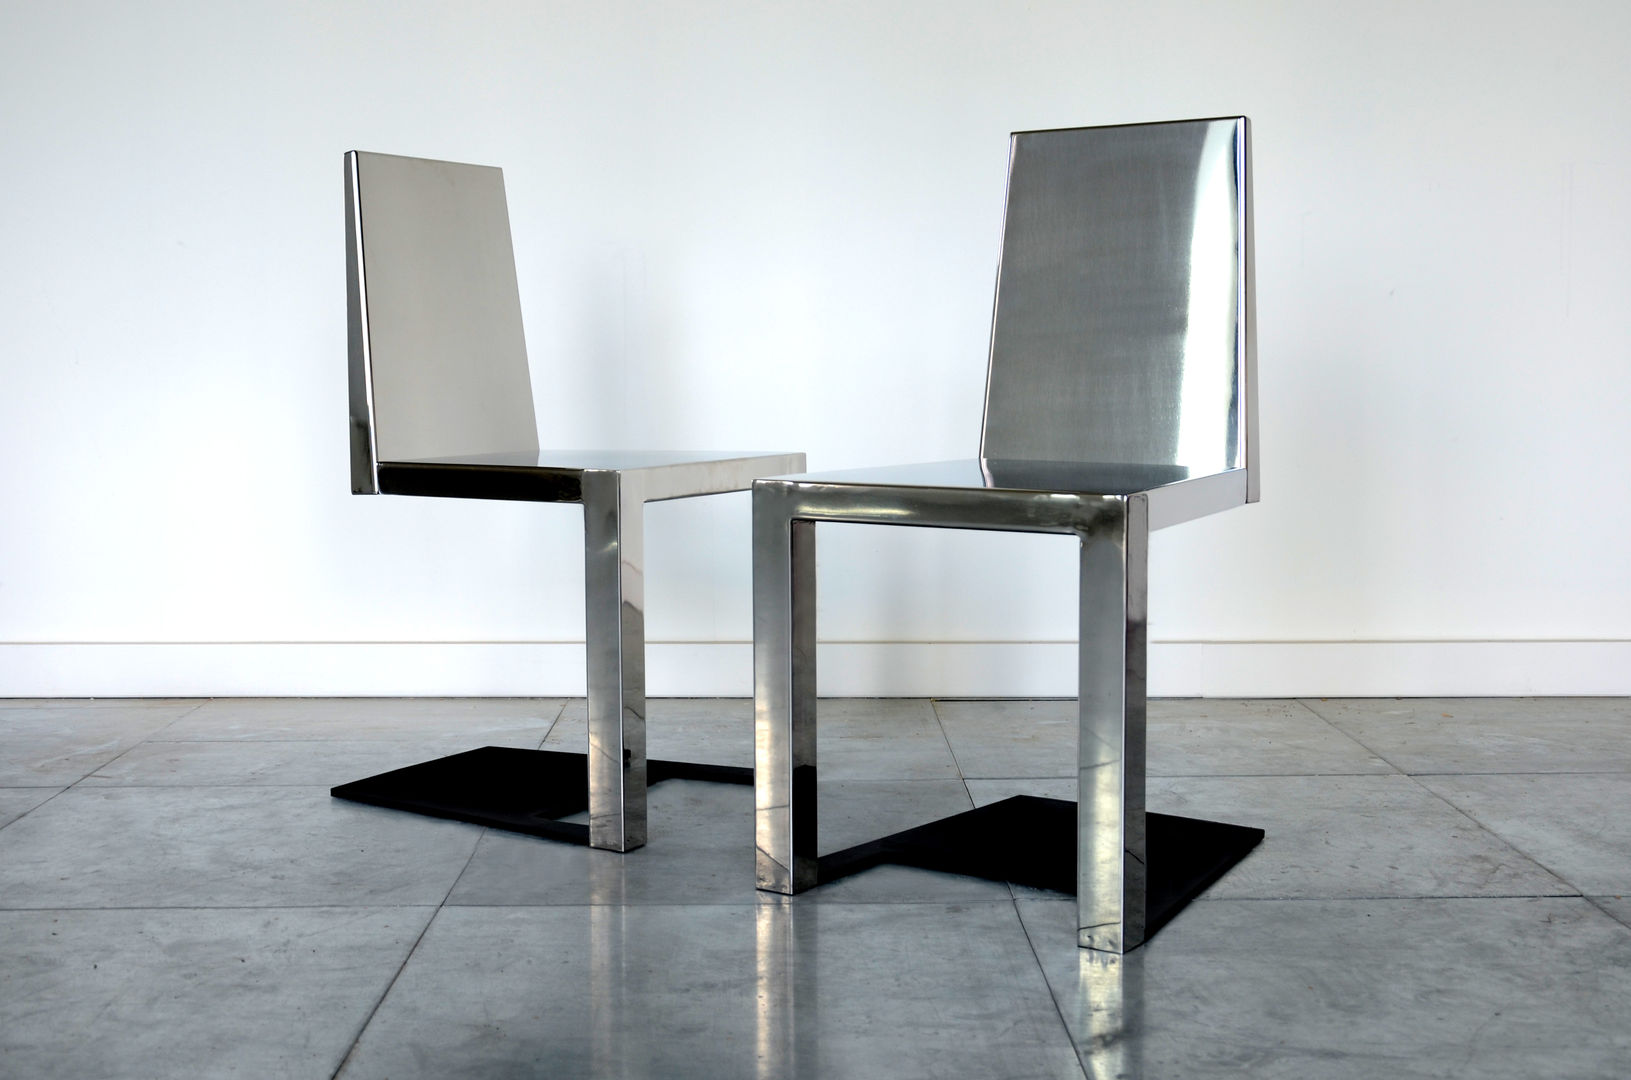 Stainless Steel Shadow Chair Duffy London Kitchen Tables & chairs